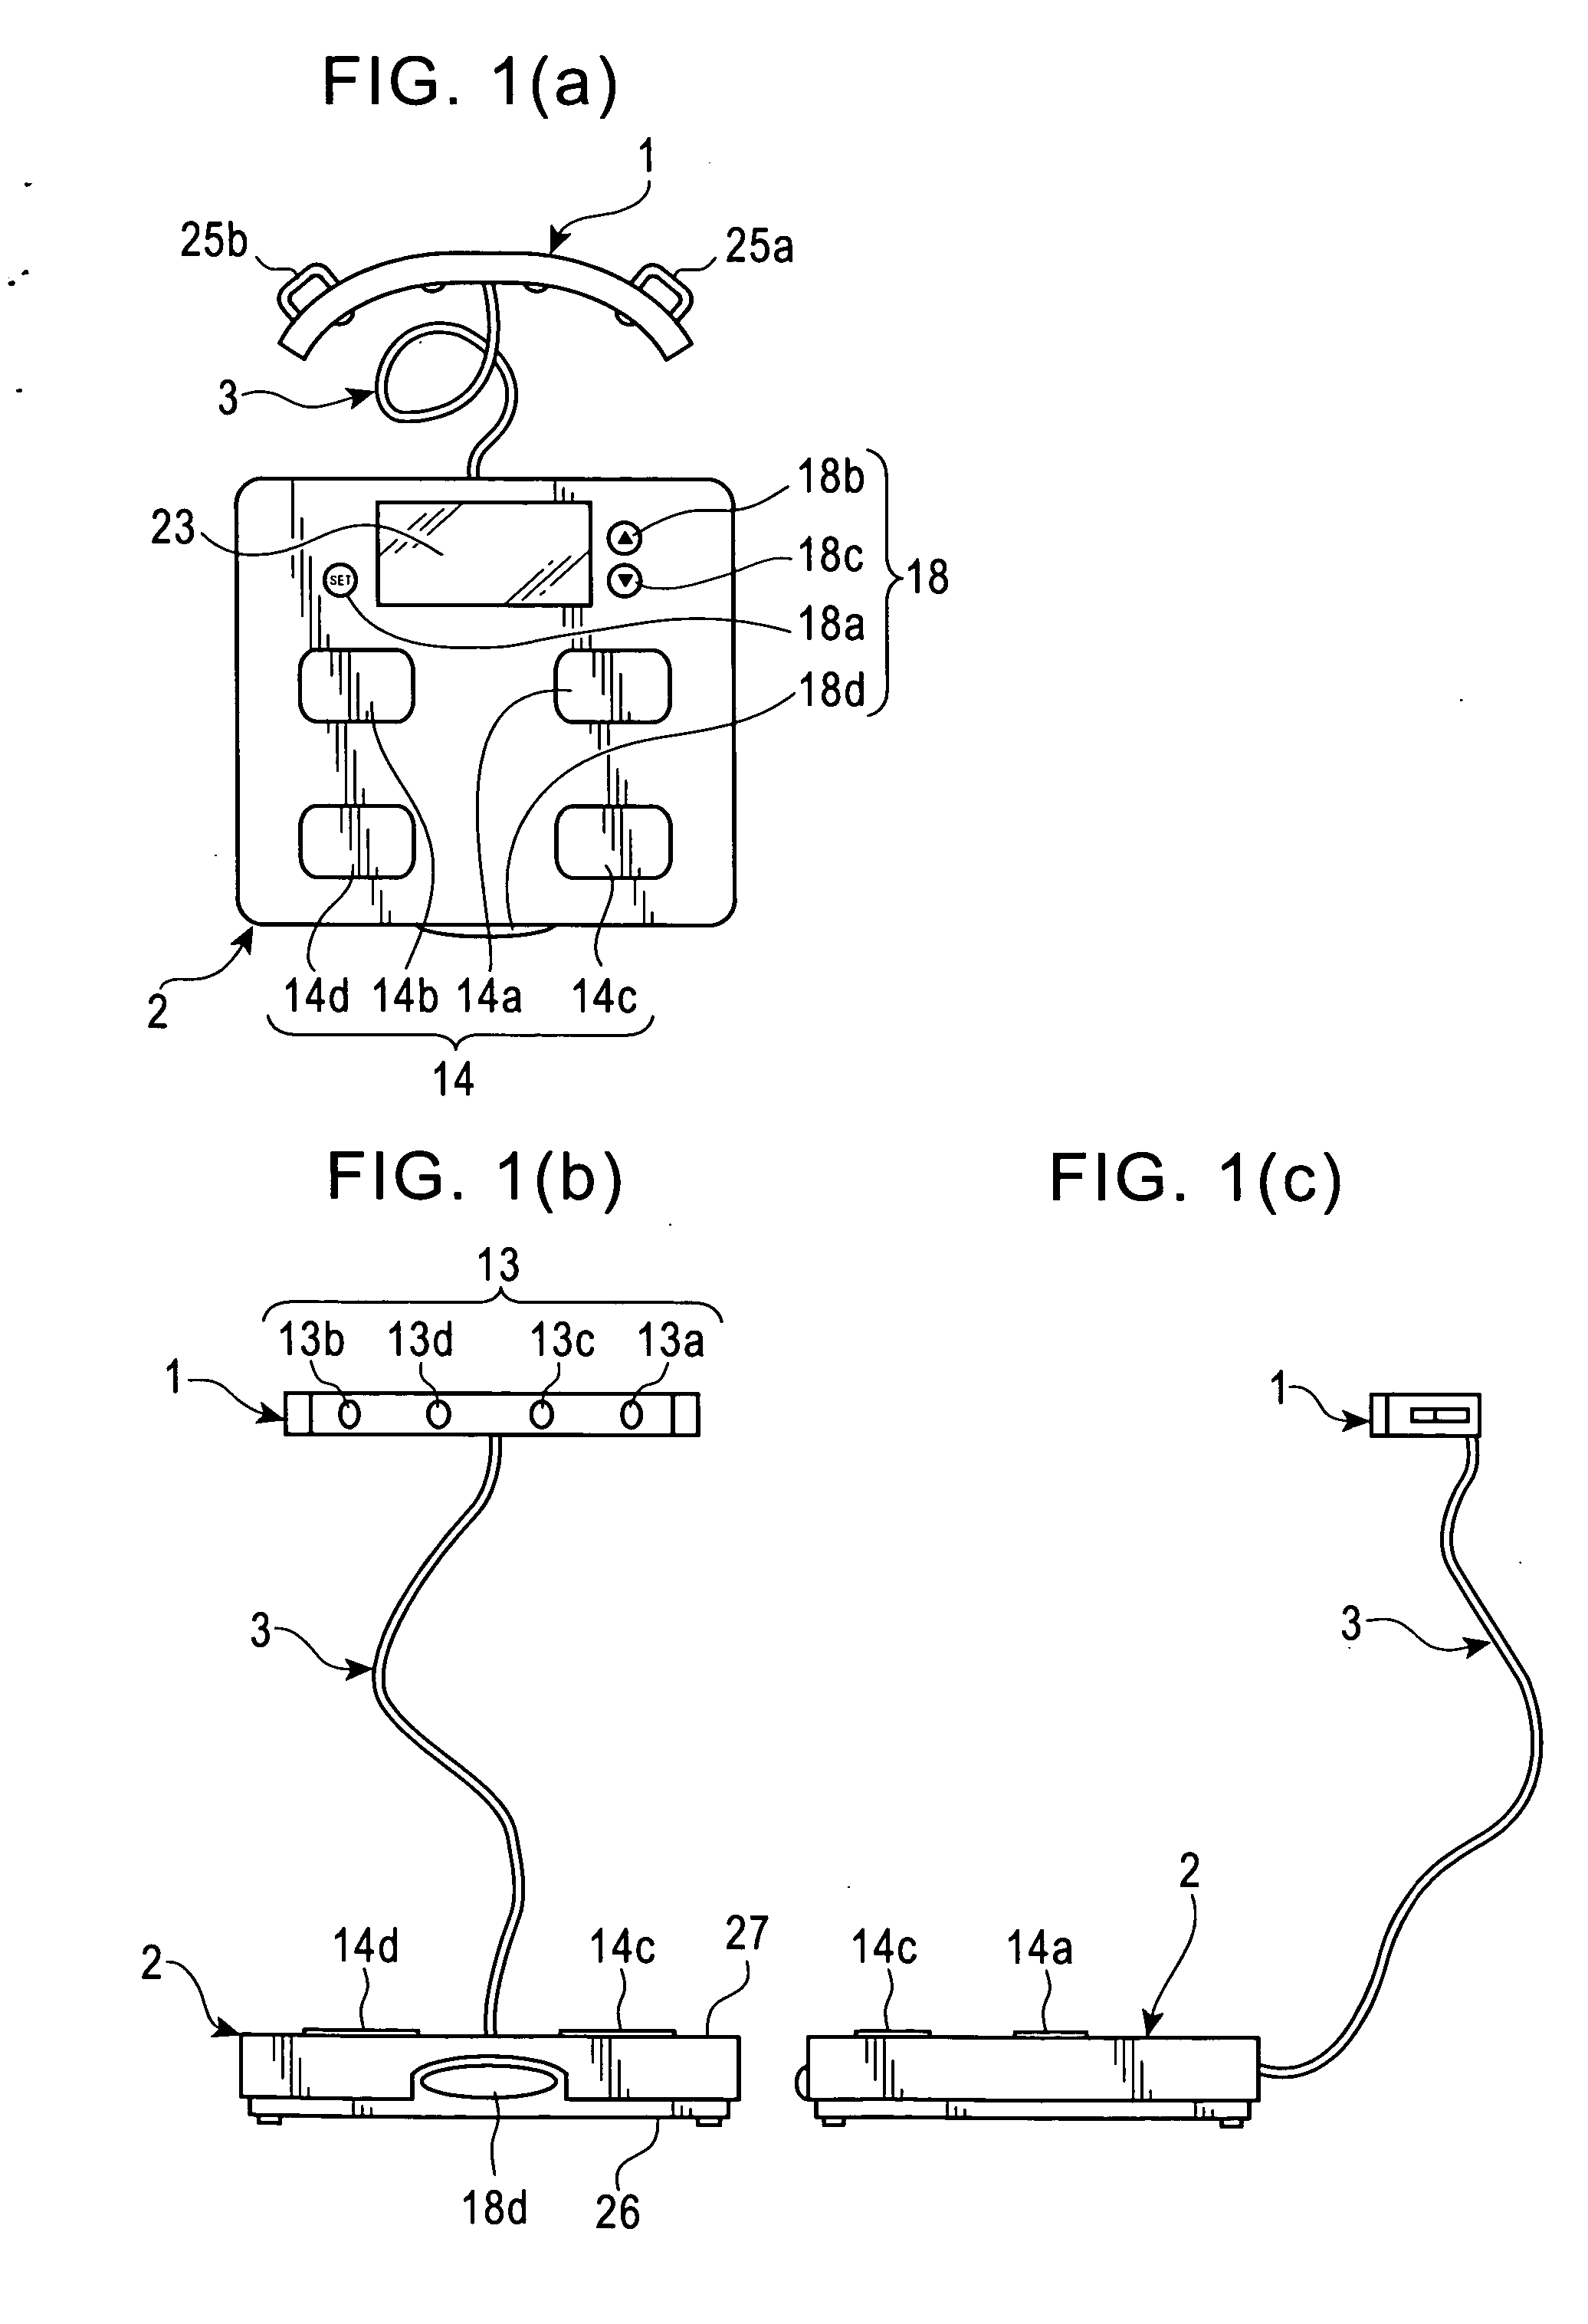 Abdominal impedance-based body composition measuring apparatus